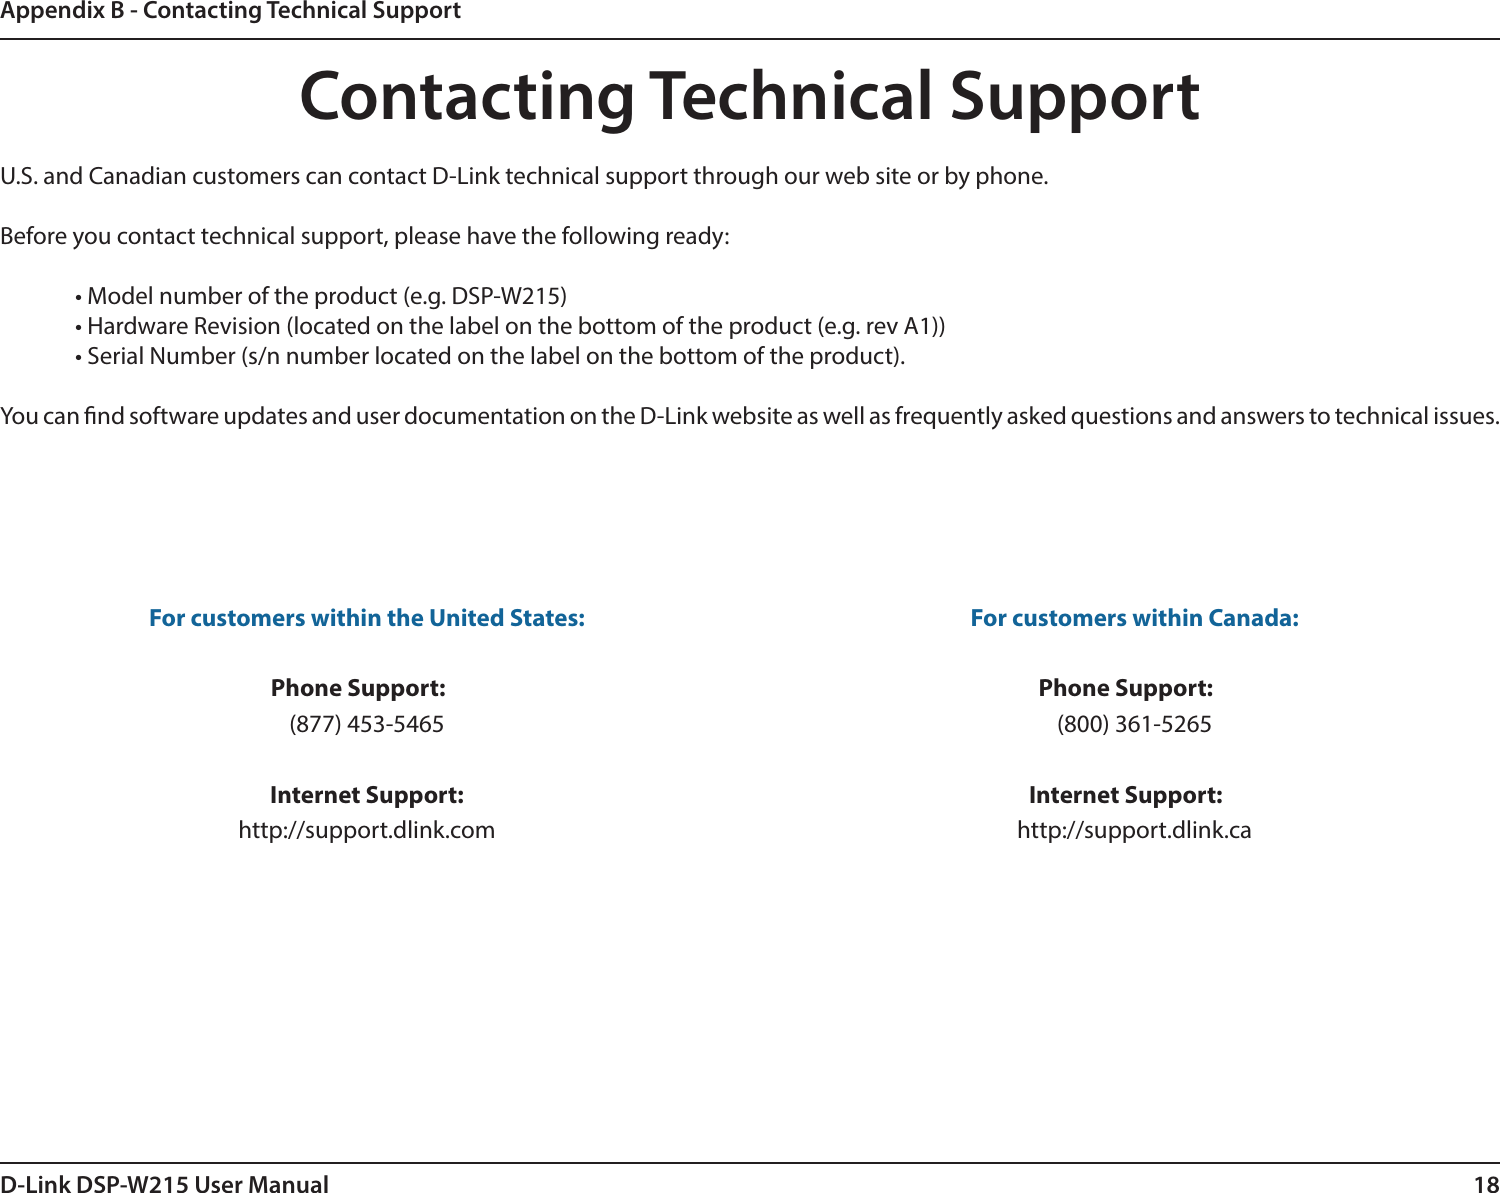 18D-Link DSP-W215 User ManualAppendix B - Contacting Technical SupportContacting Technical SupportU.S. and Canadian customers can contact D-Link technical support through our web site or by phone.Before you contact technical support, please have the following ready:  • Model number of the product (e.g. DSP-W215)  • Hardware Revision (located on the label on the bottom of the product (e.g. rev A1))  • Serial Number (s/n number located on the label on the bottom of the product). You can nd software updates and user documentation on the D-Link website as well as frequently asked questions and answers to technical issues.For customers within the United States: Phone Support:  (877) 453-5465 Internet Support: http://support.dlink.com For customers within Canada: Phone Support:  (800) 361-5265    Internet Support: http://support.dlink.ca